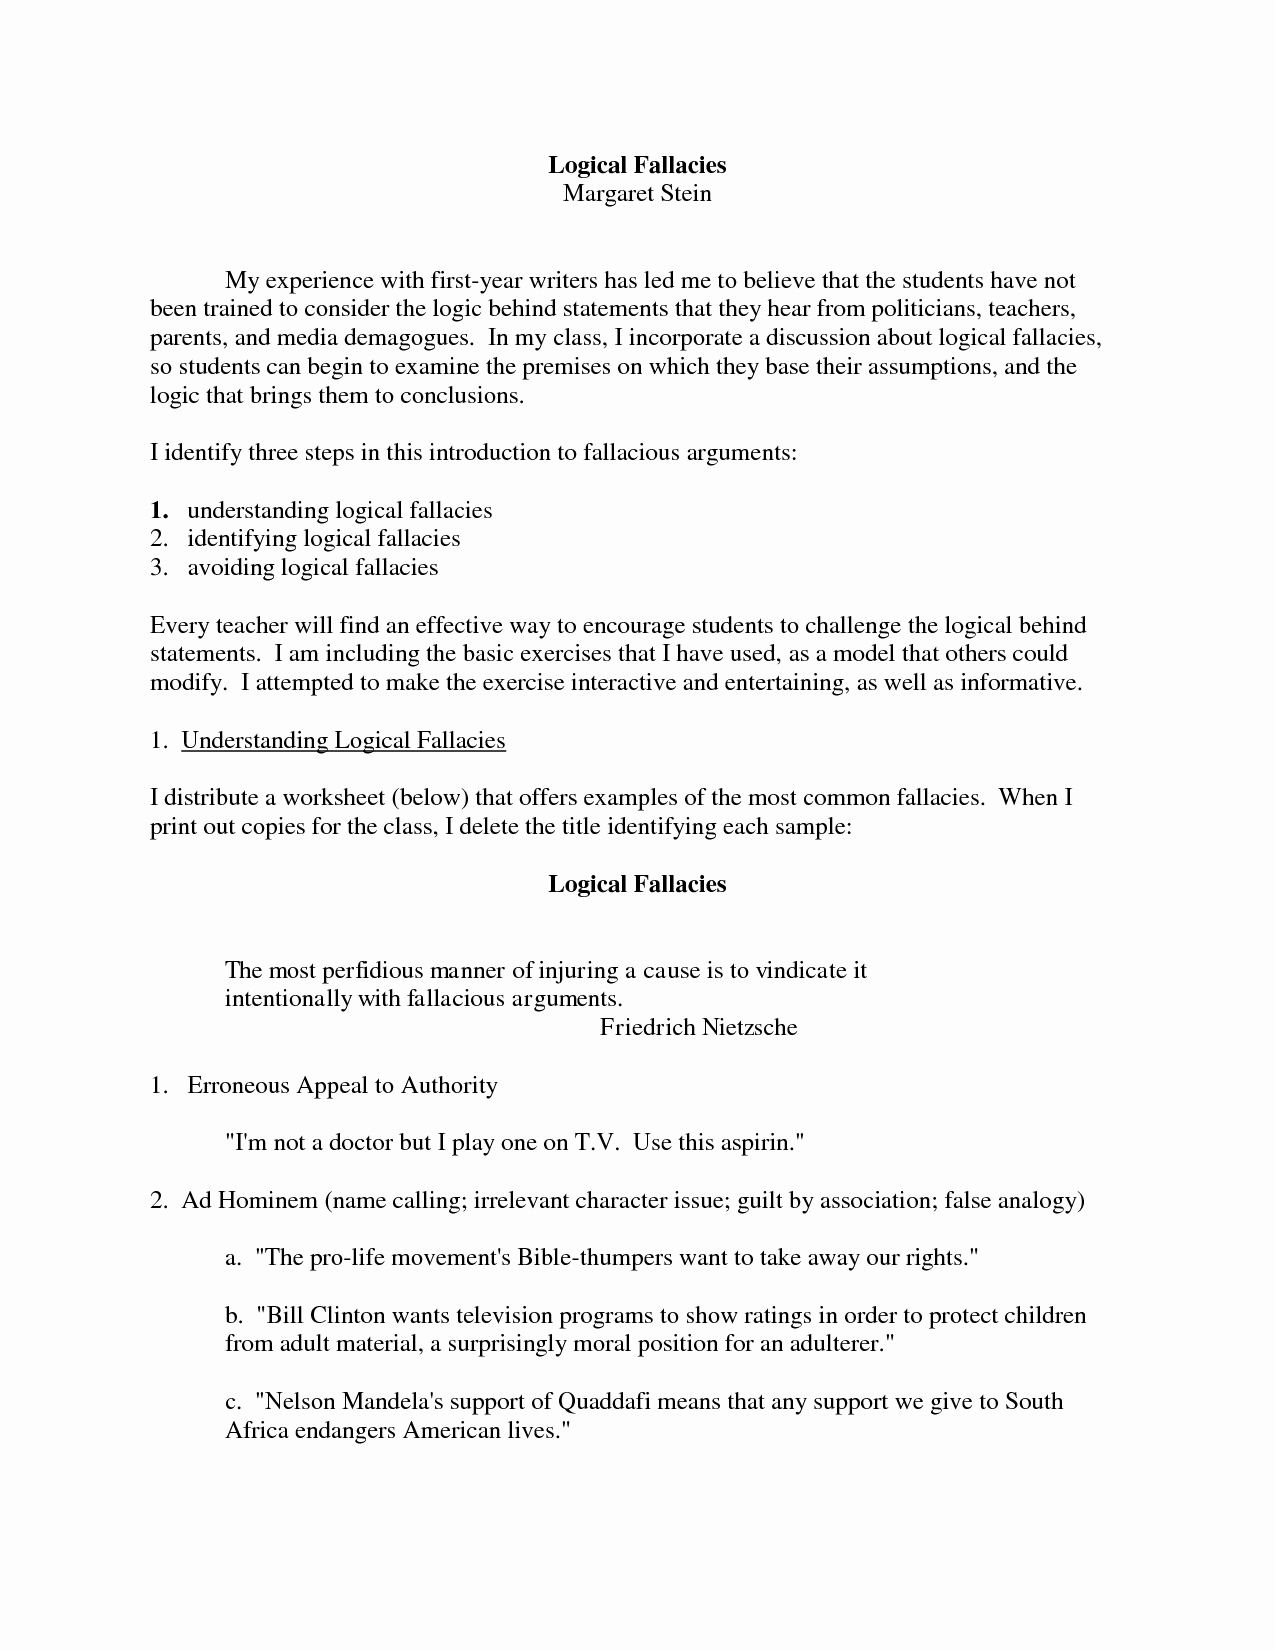 Logical Fallacies Worksheet with Answers Unique 11 Best Of Logical Fallacies Worksheet with Answers